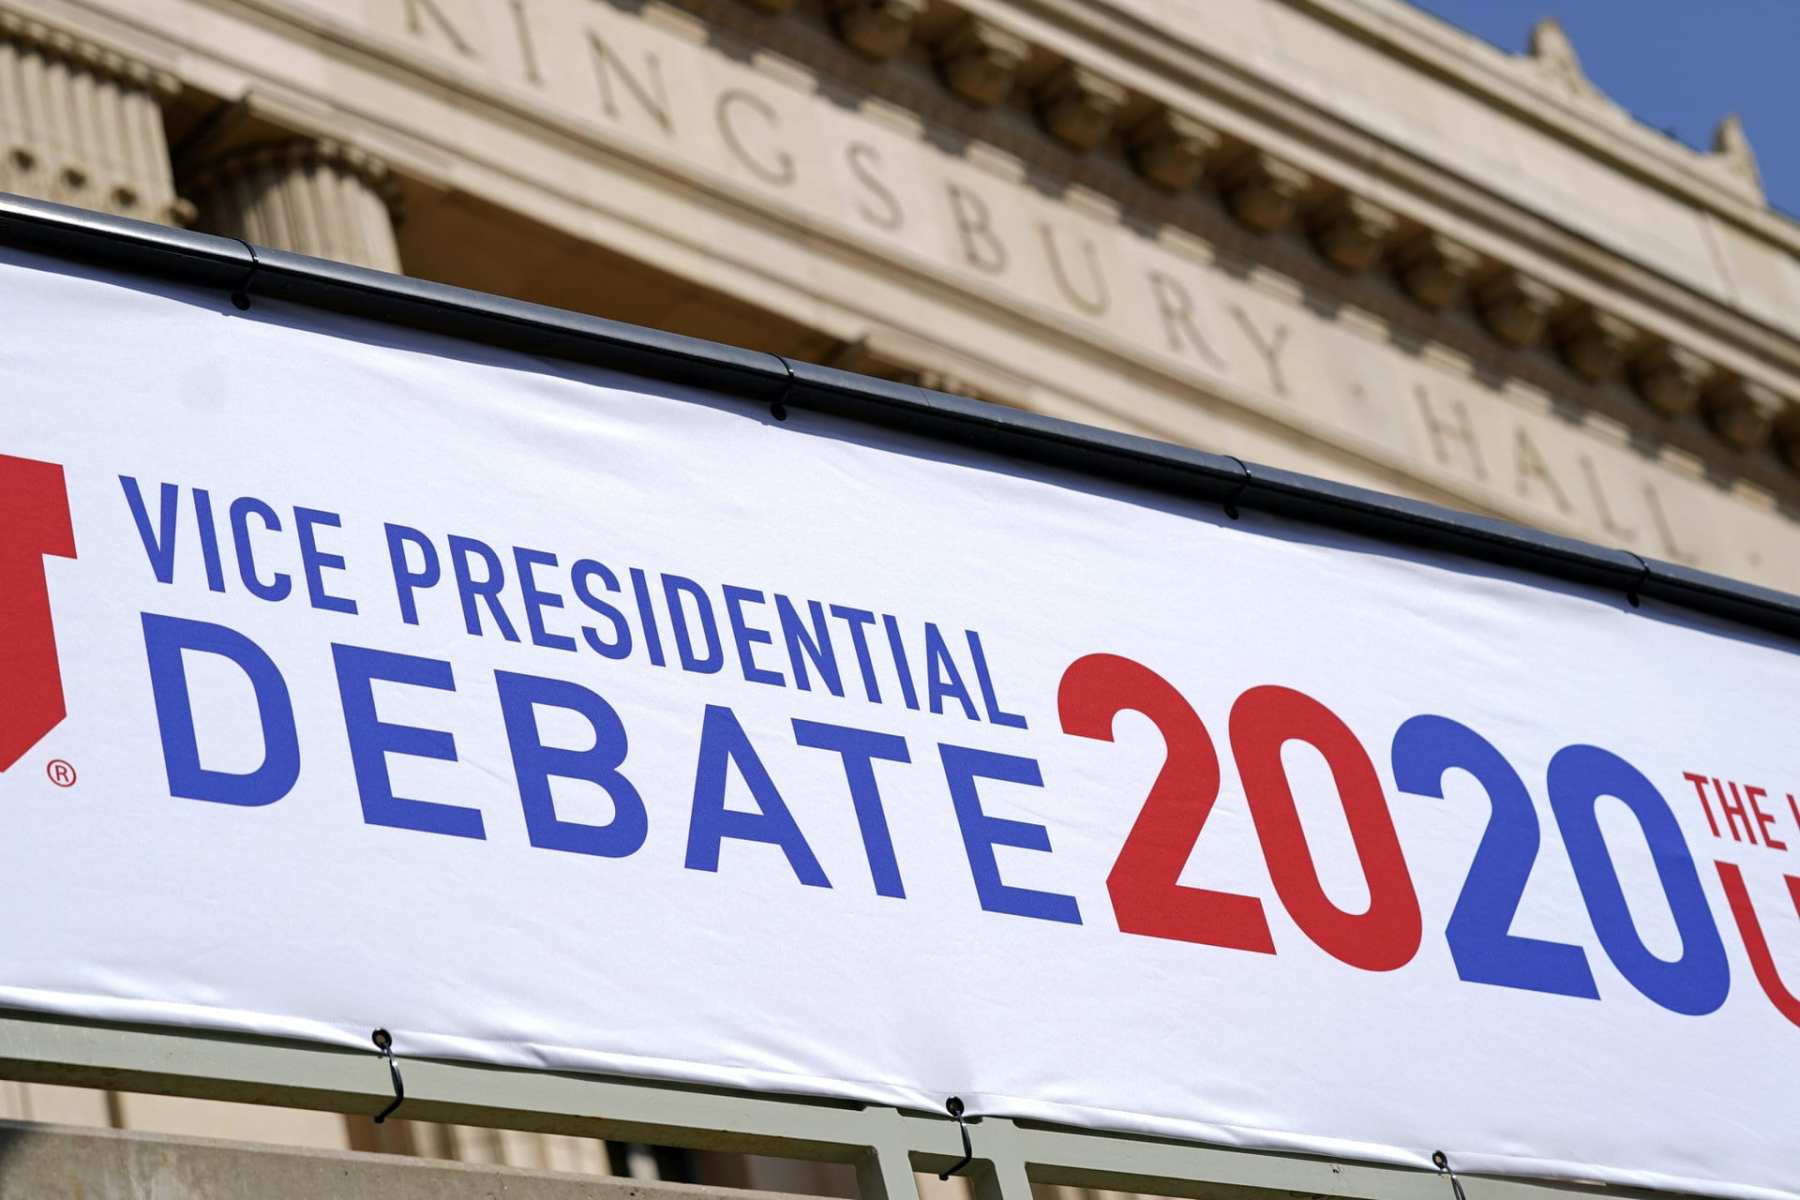 A sign hanging outside of a building that reads, "Vice presidential debate 2020."